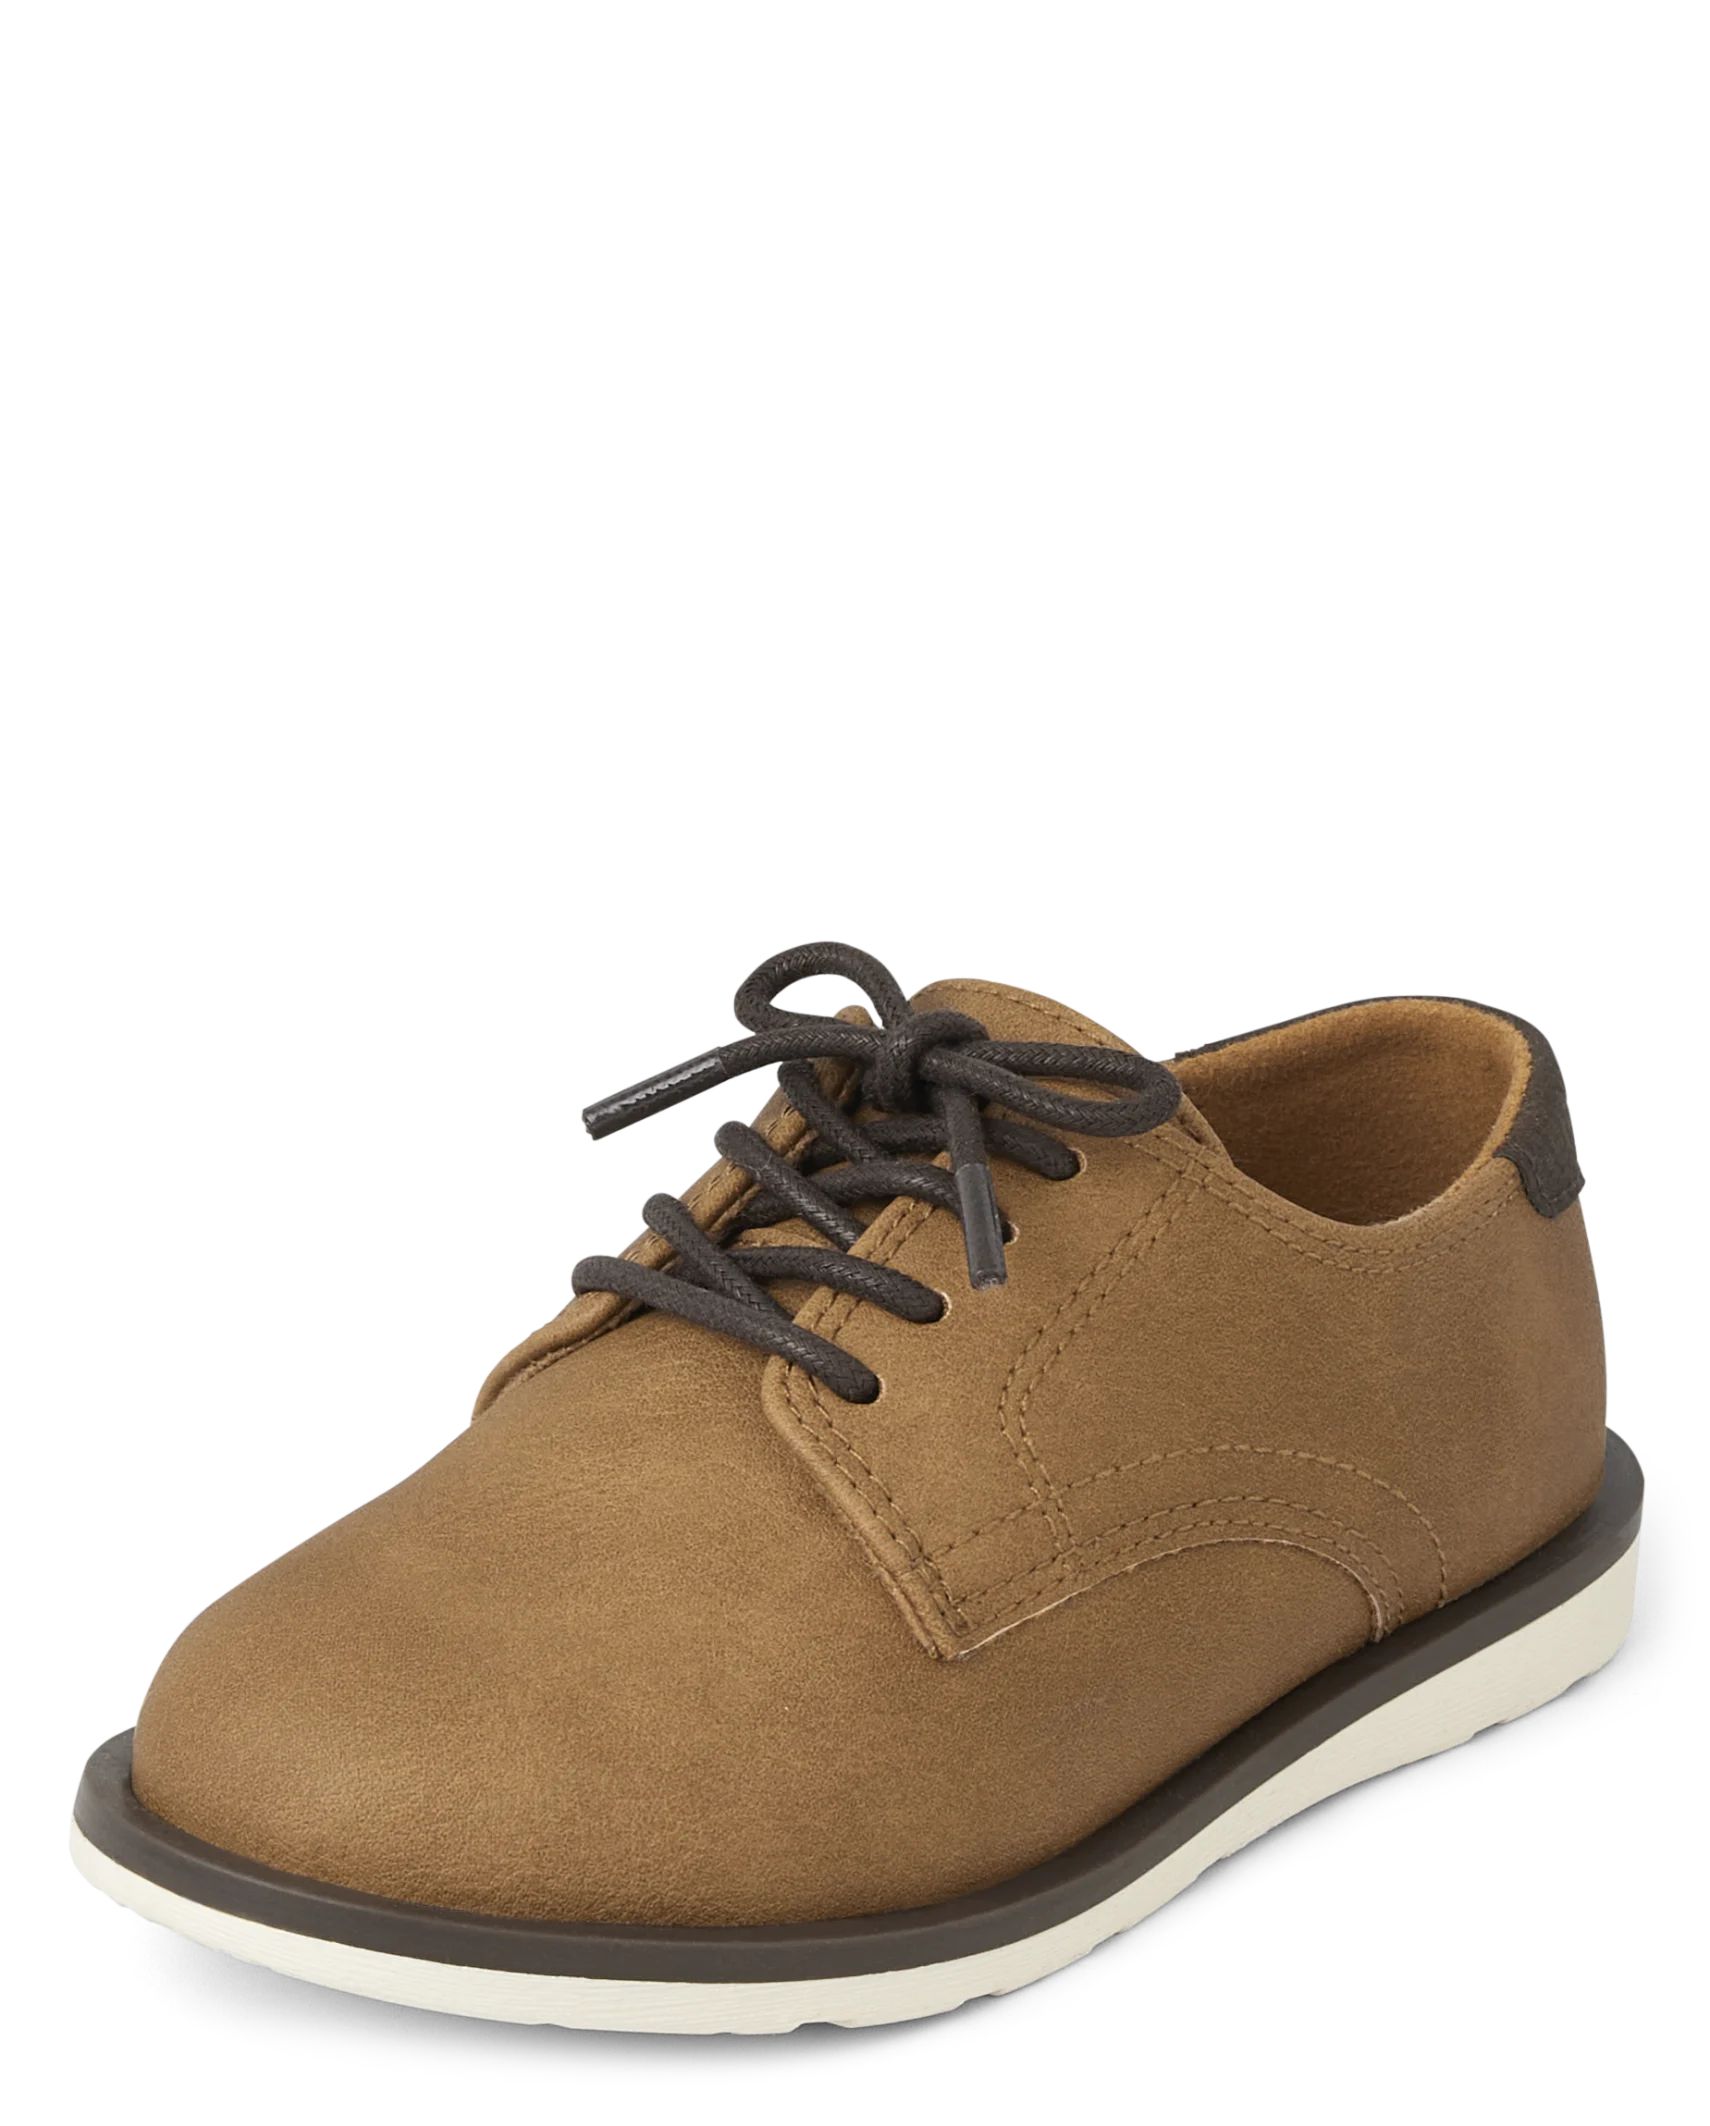 Toddler Boys Dress Shoes - tan | The Children's Place